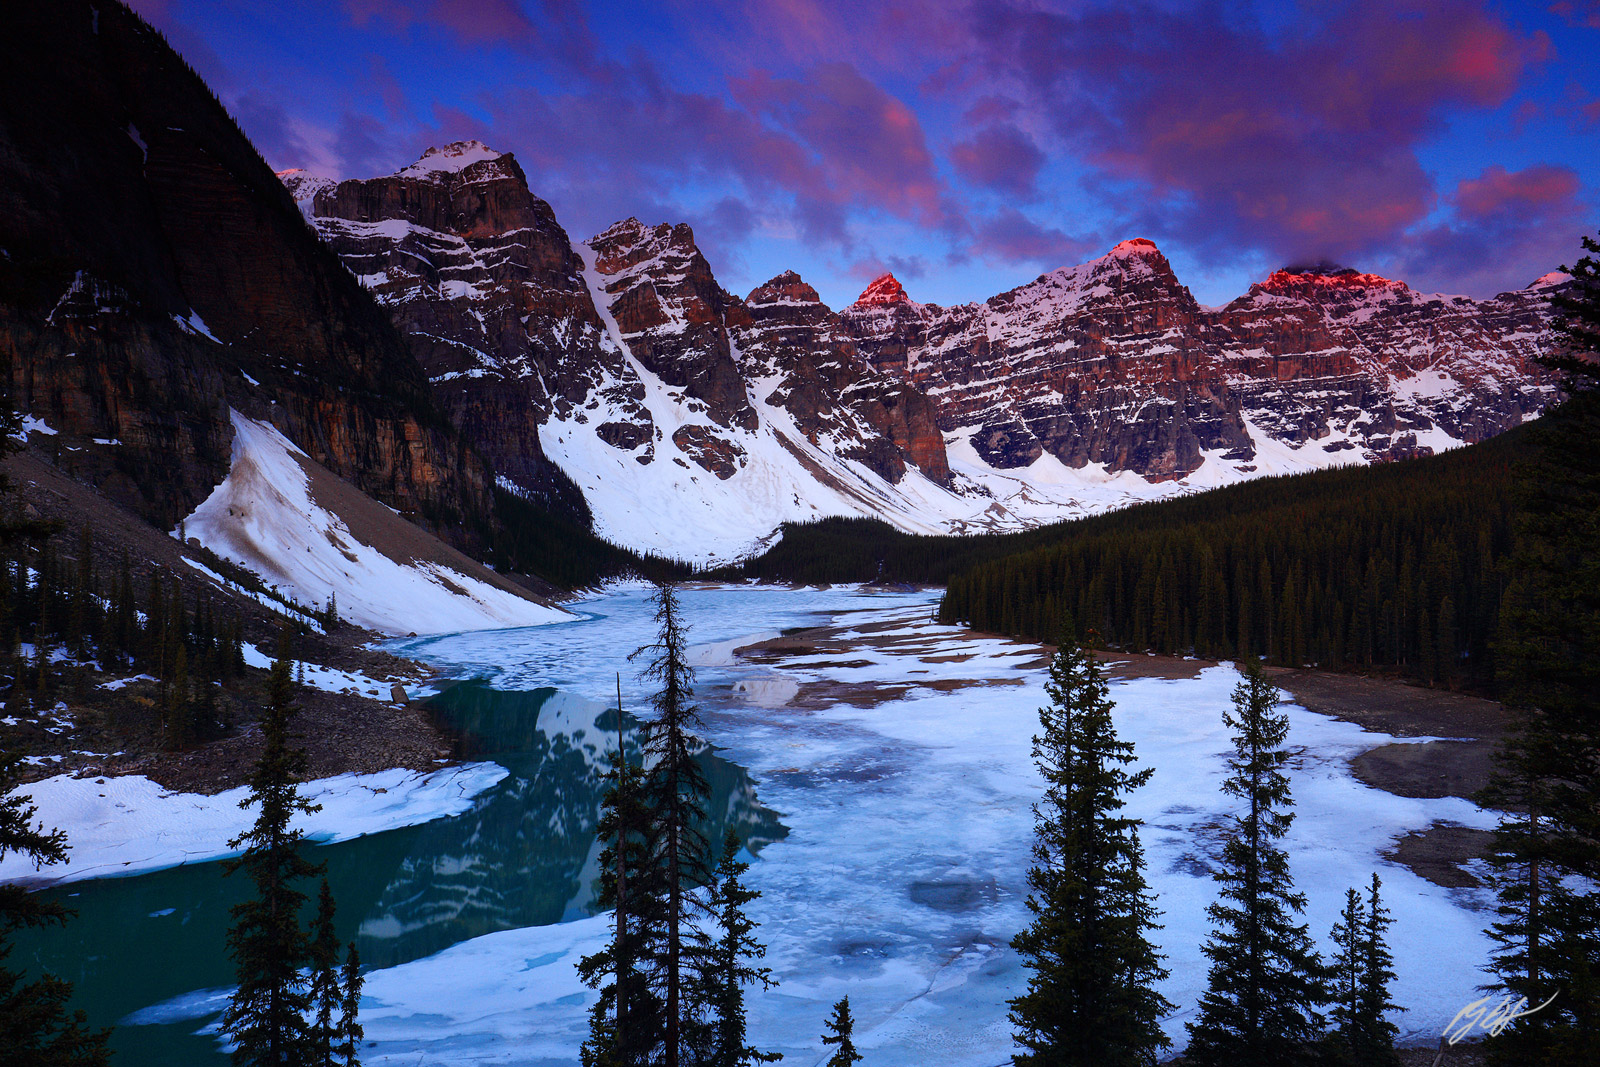 Sunrise and the Ten Peak Over a Frozen Moraine Lake in Banff National Park in Canada